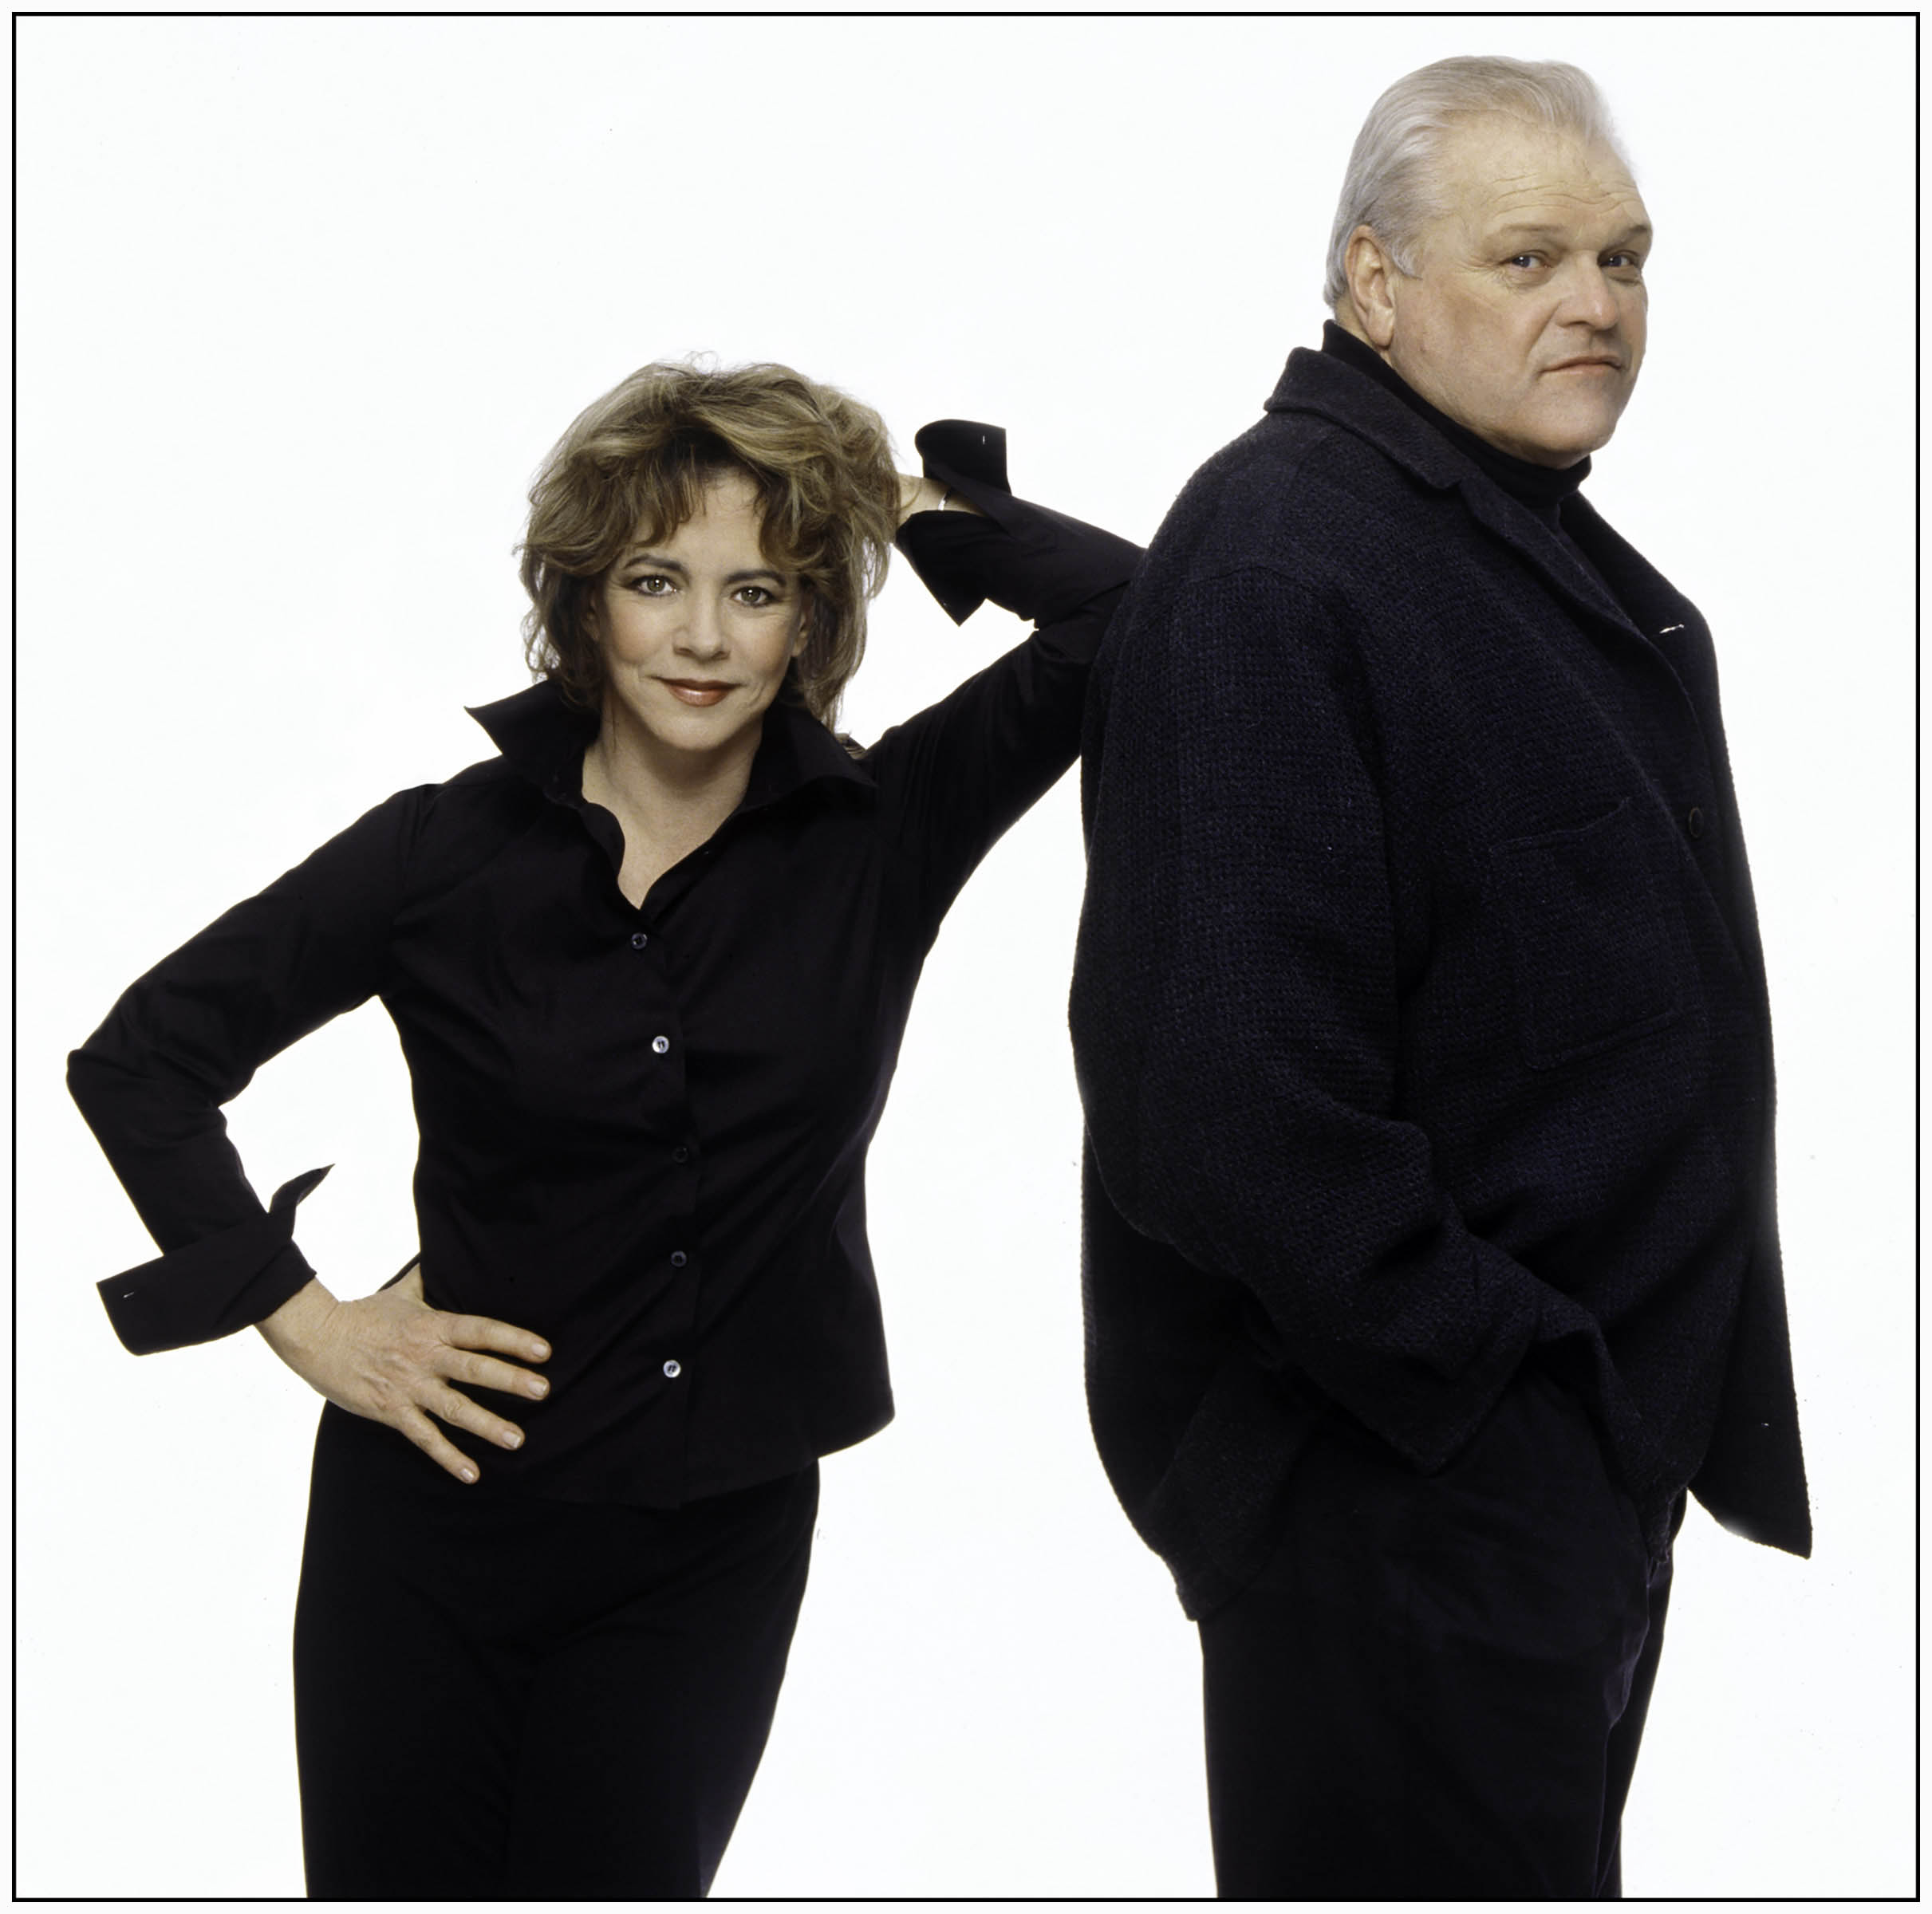 Stockard Channing and Brian Dennehy by Tess Steinkolk the best NYC Actors and Corporate Headshot Photographer